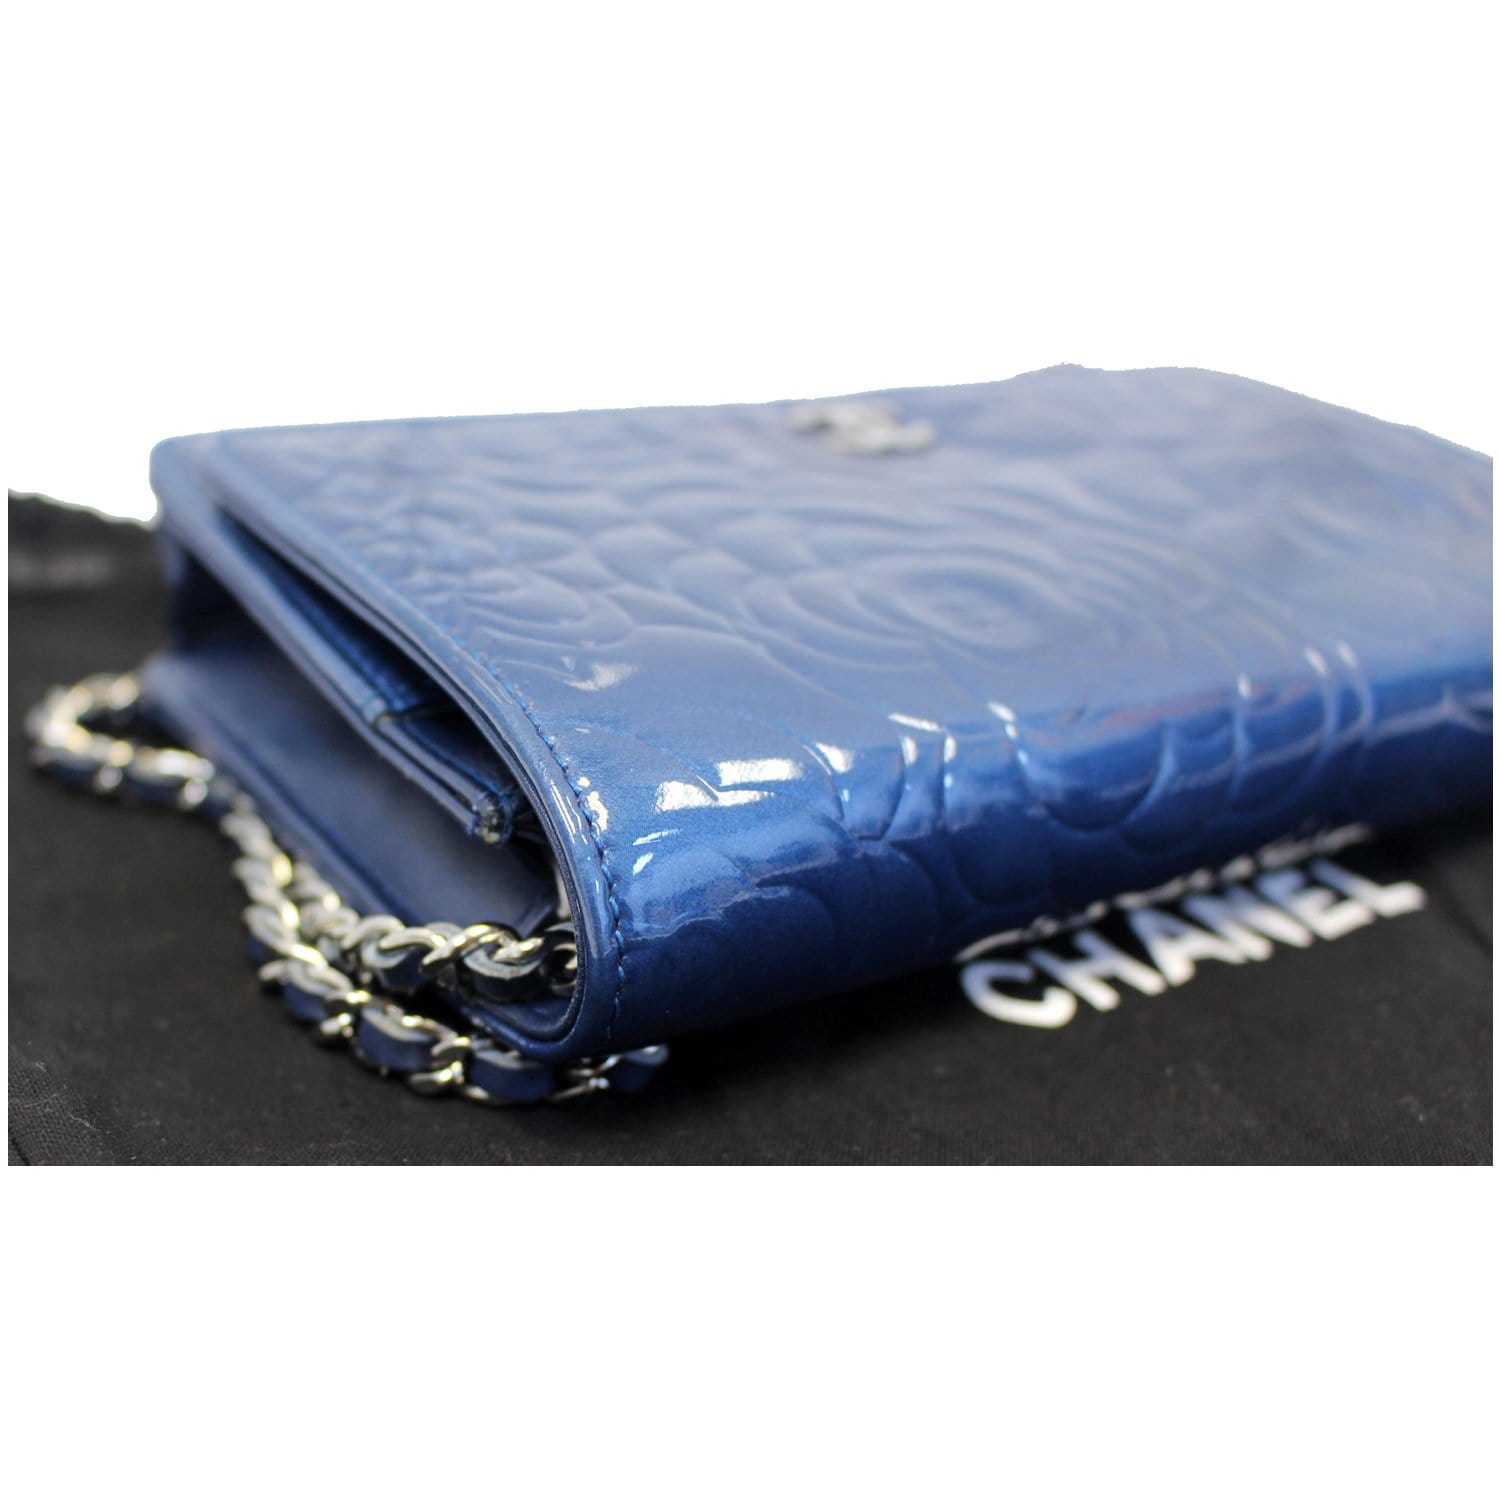 CHANEL Camellia Patent Leather Wallet on Chain WOC Royal Blue